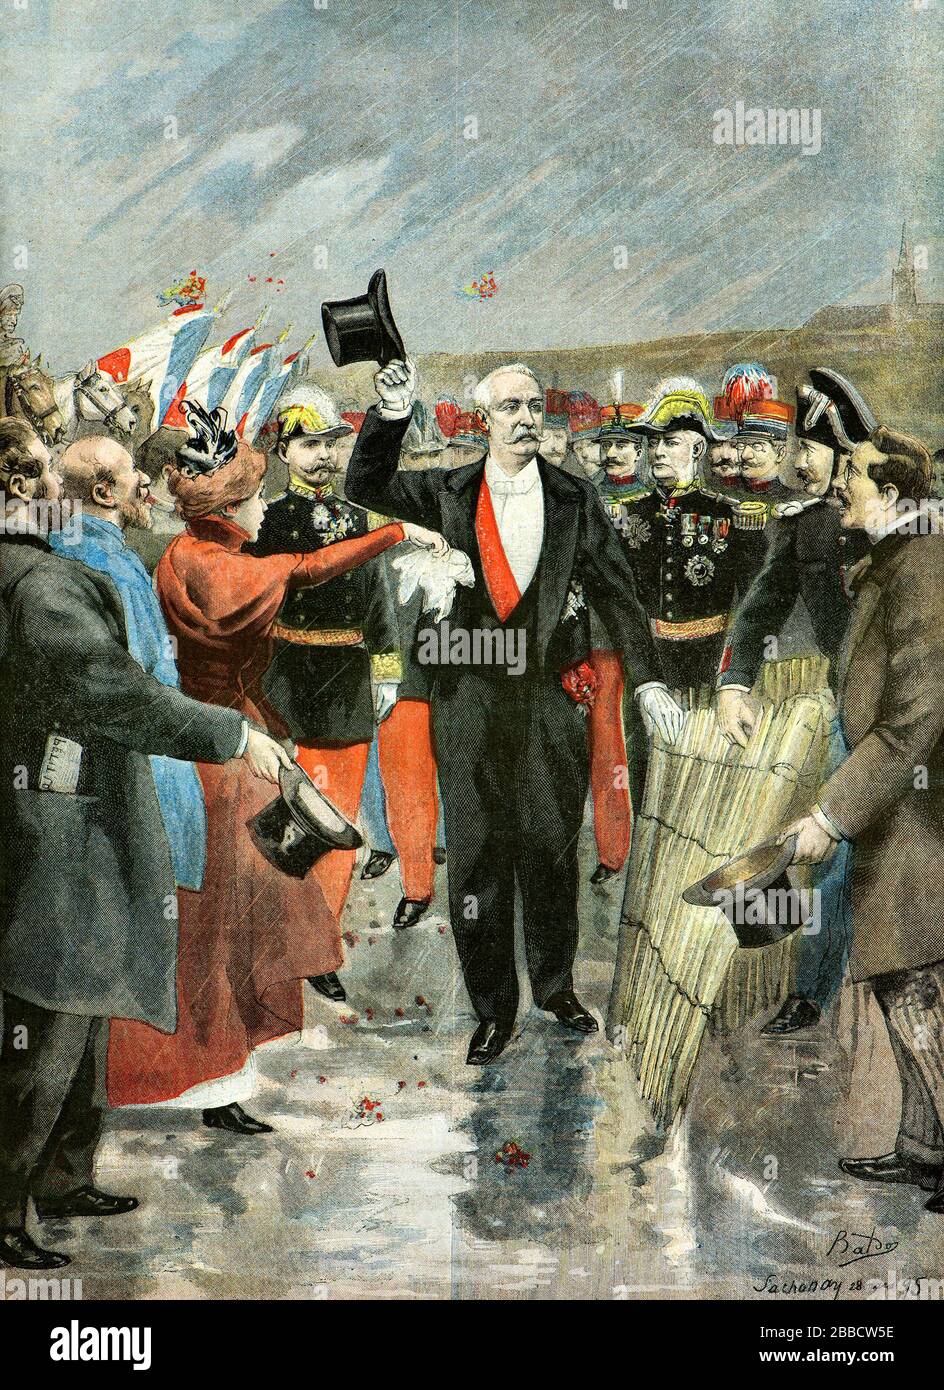 Engraving - The President of the French Republic Felix Faure cheered by the crowd on March 28, 1895 at the Sathonay camp after his visit to the army - Private Collection Stock Photo